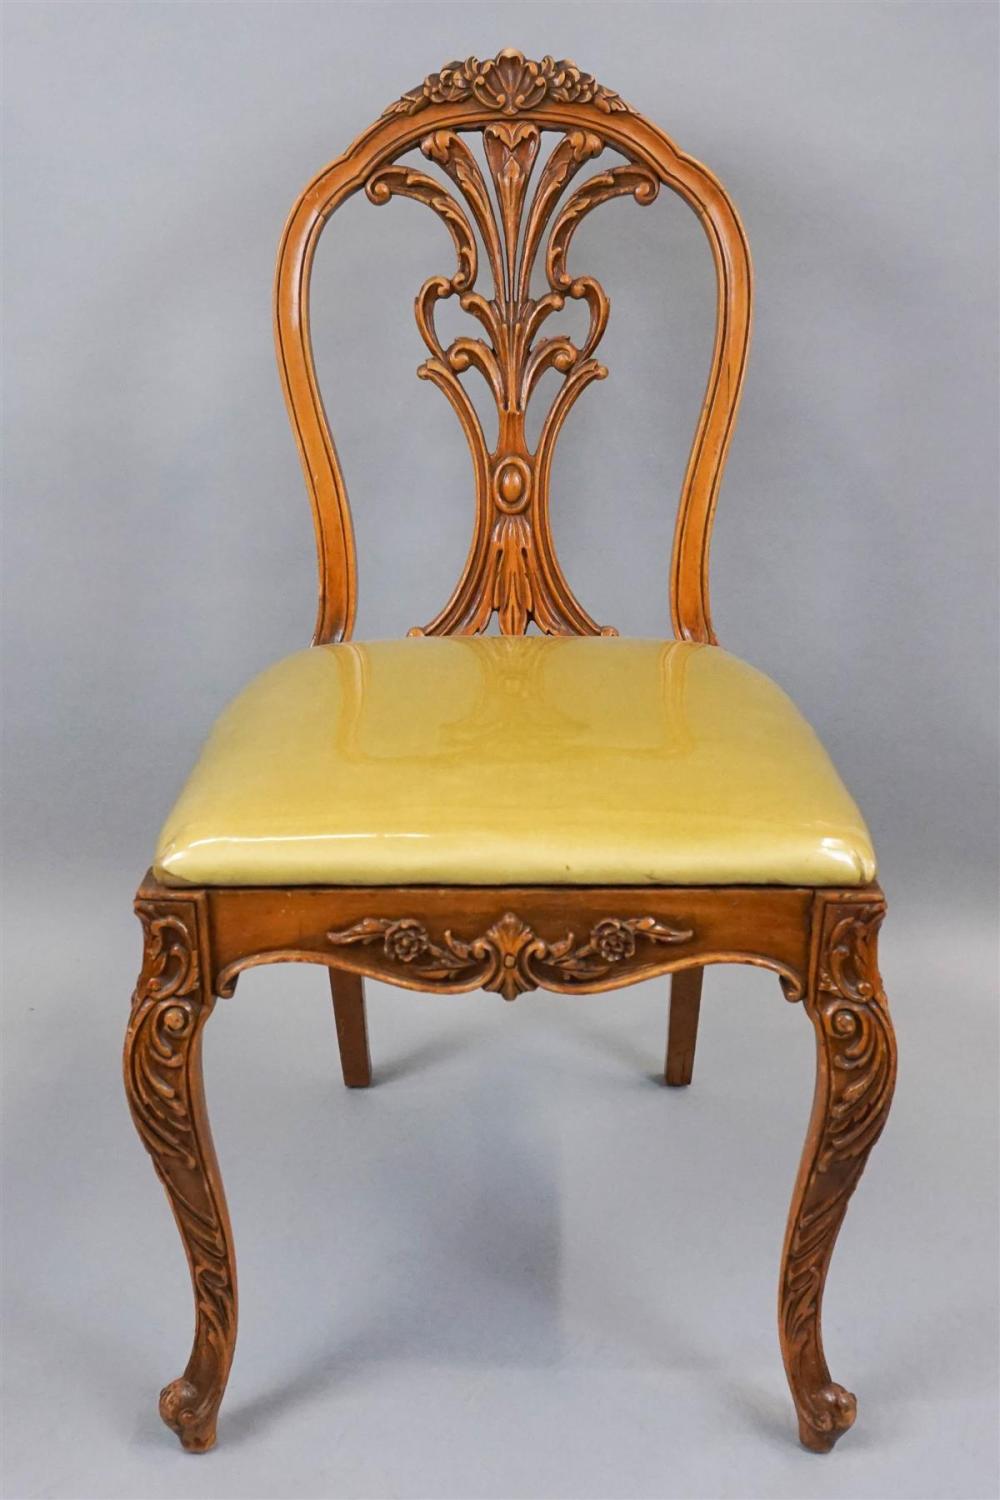 LOUIS XV STYLE CHAIR WITH LIME